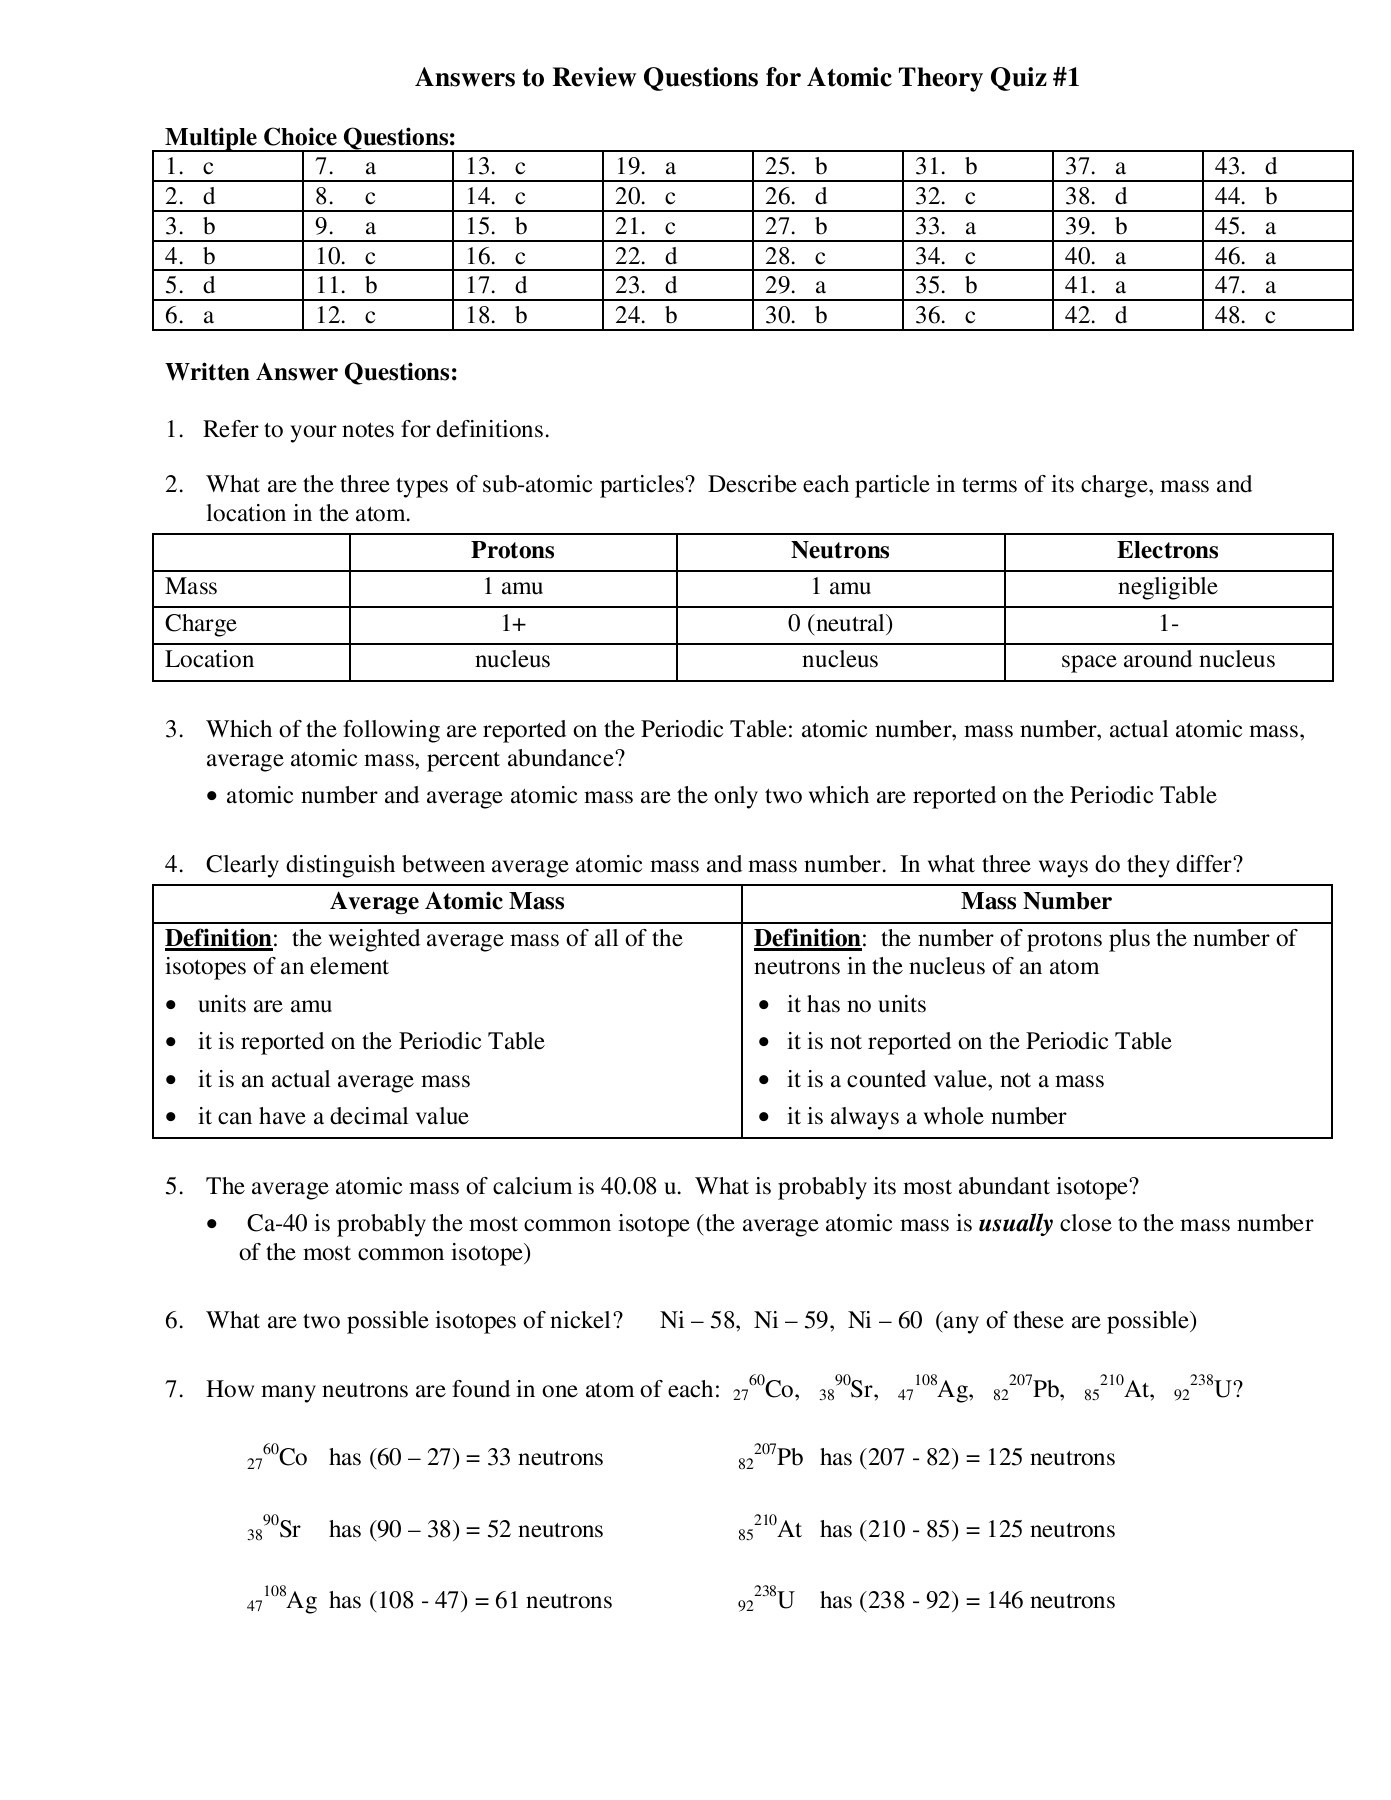 Atoms and isotopes Worksheet Answers Answers to Review Questions for atomic theory Quiz 1 Pages